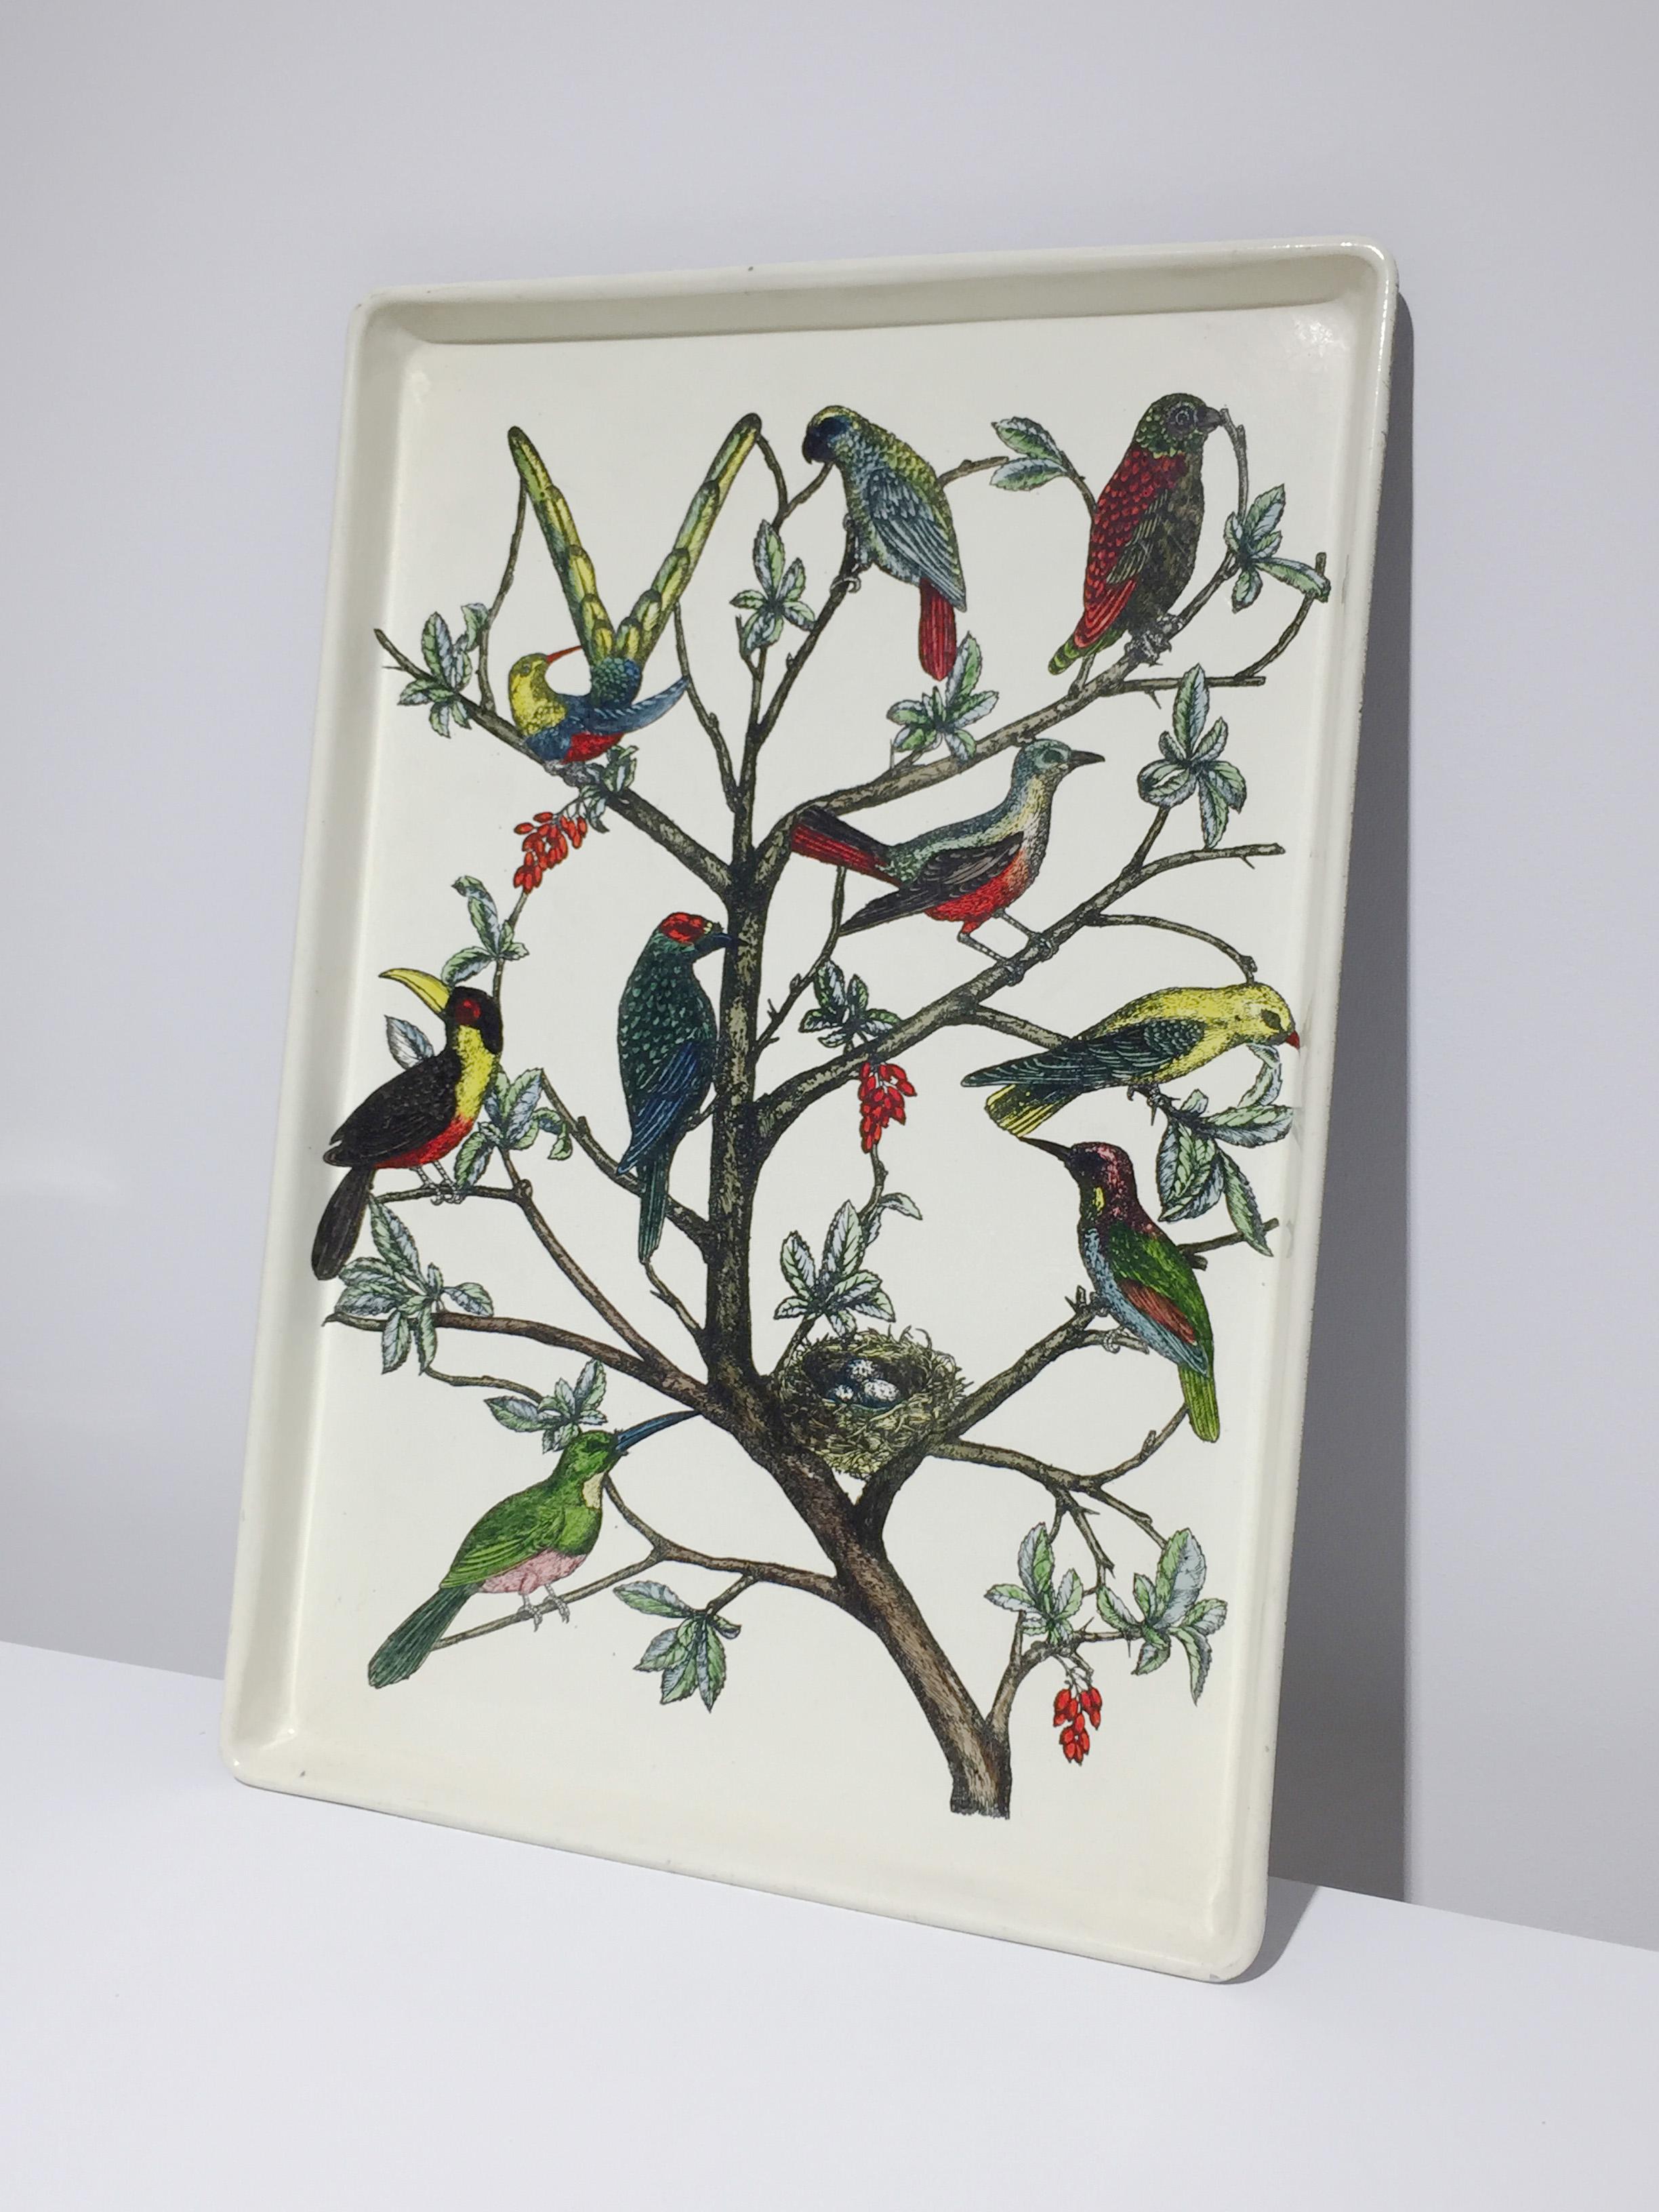 Tray made of aluminum with offset-printing of birds
Dimensions: H.58cm W.46cm D.1cm
Design and manufacture / Piero Fornasetti
Labeled 'Fornasetti'.
 